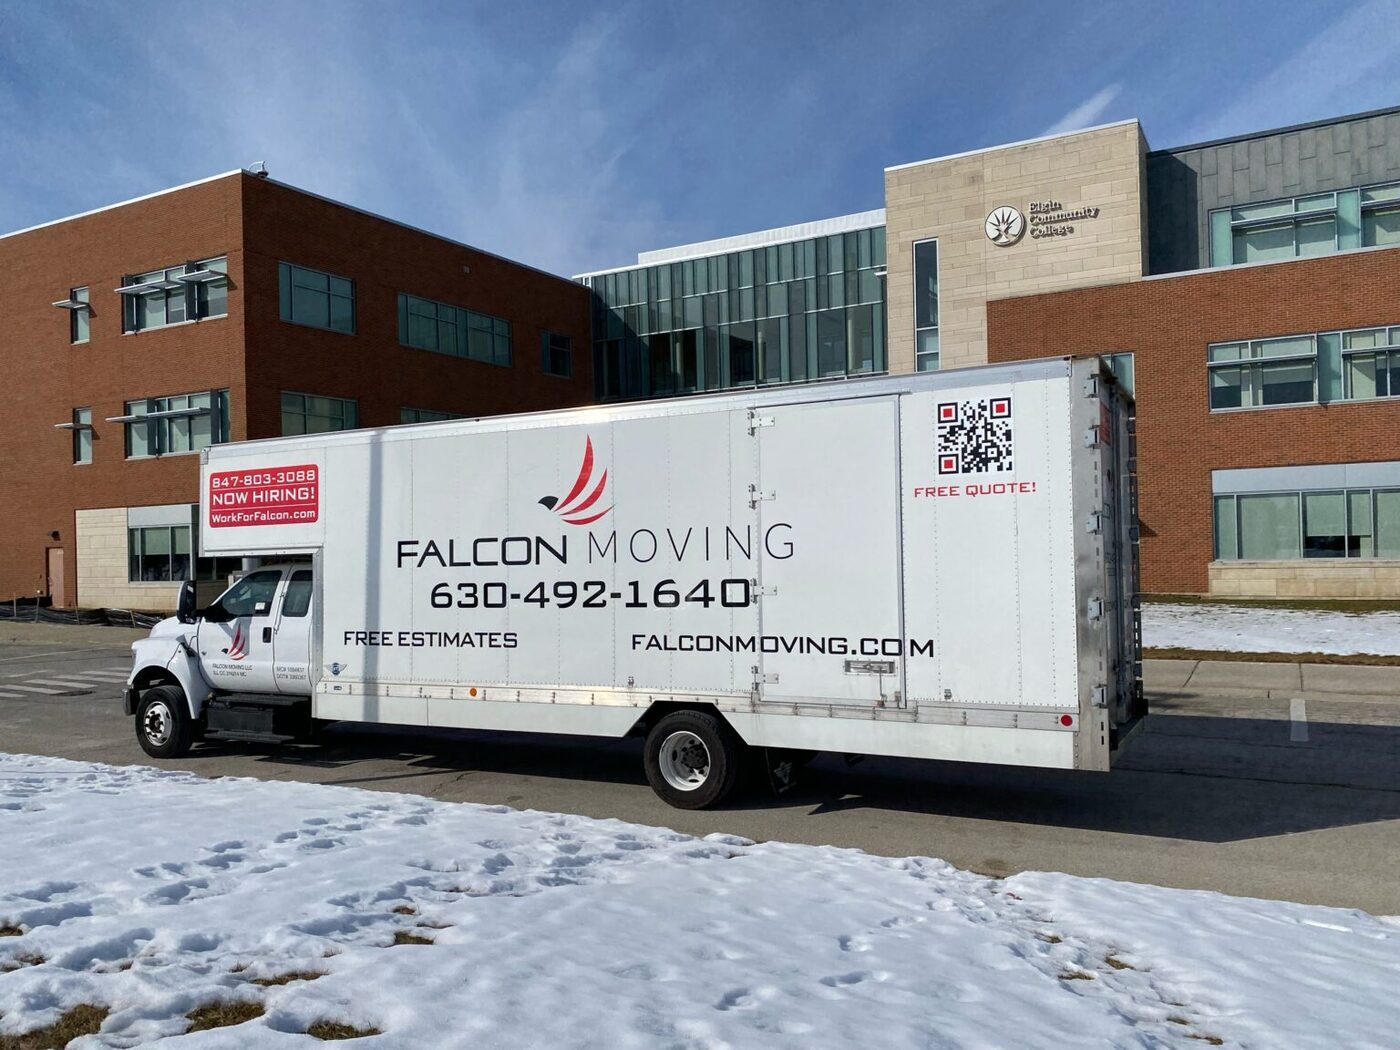 Falcon Moving, LLC is a moving company based in Elgin, IL.